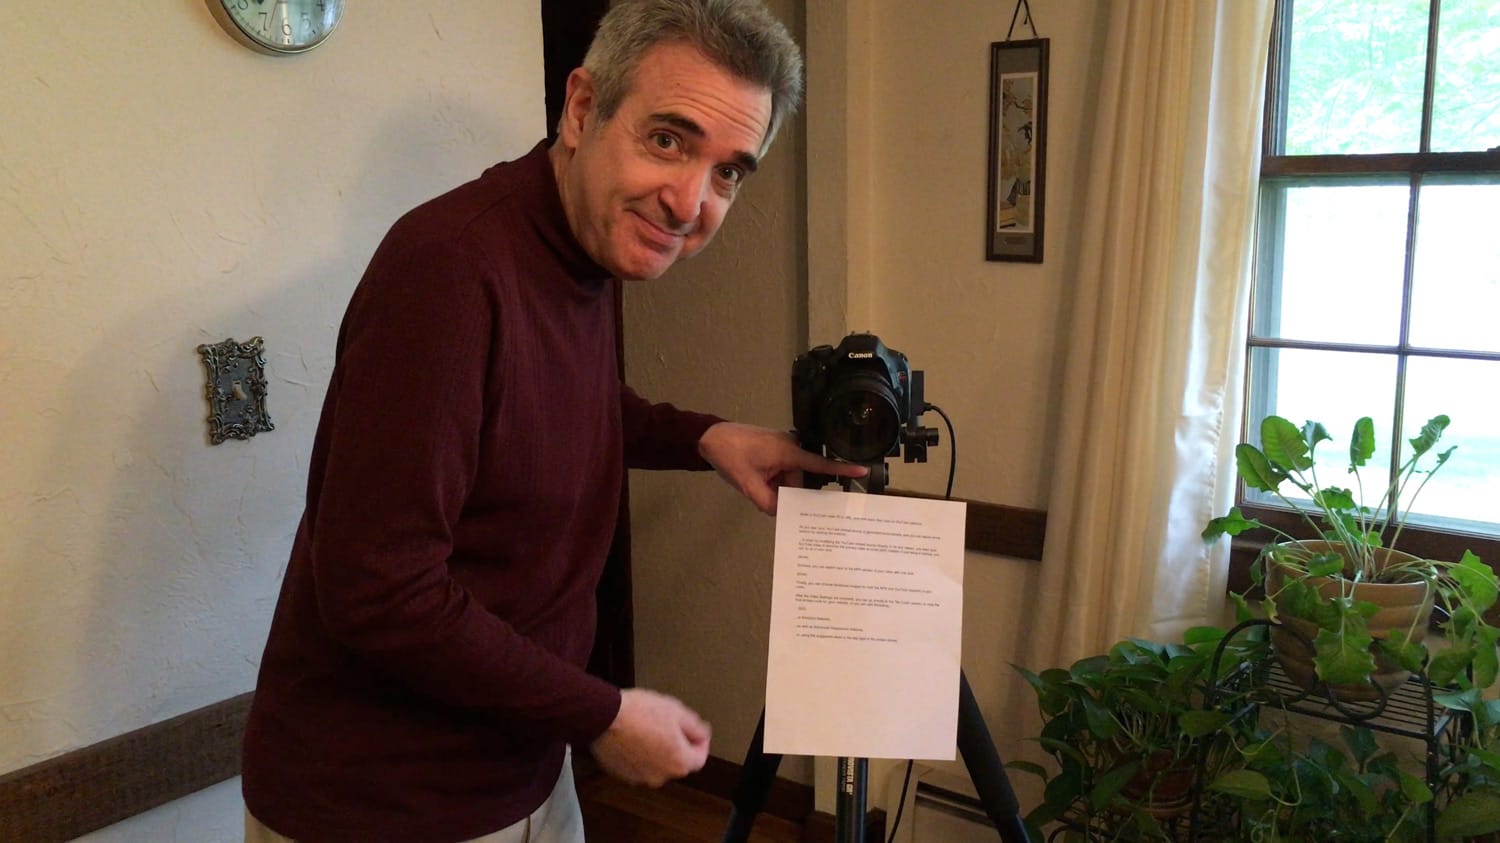 How to nail your performance without a teleprompter